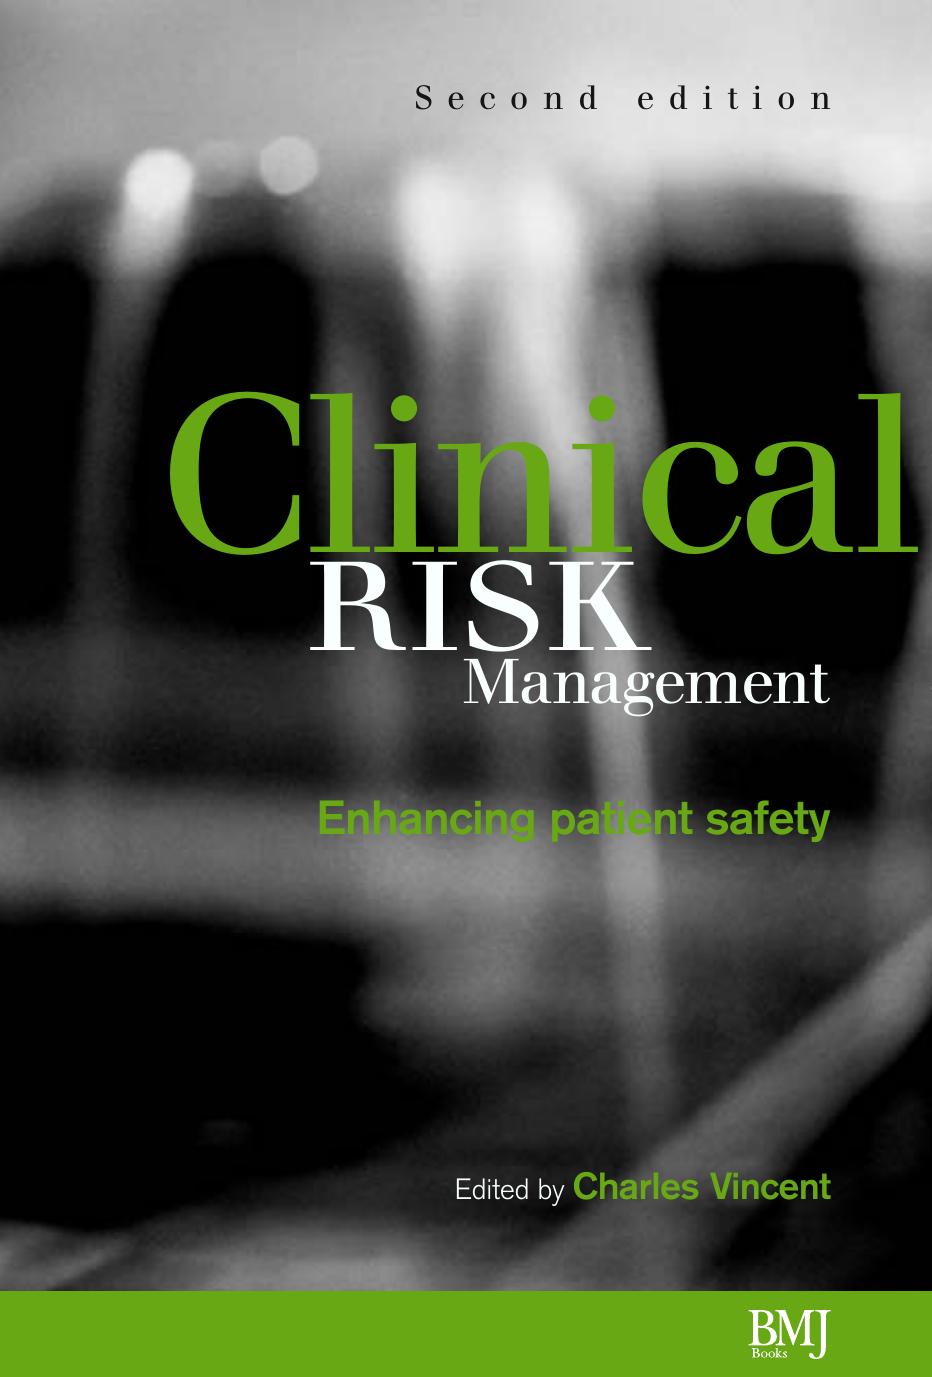 Clinical Risk Management-Enhancing Patient Safety,2nd Edition.jpg